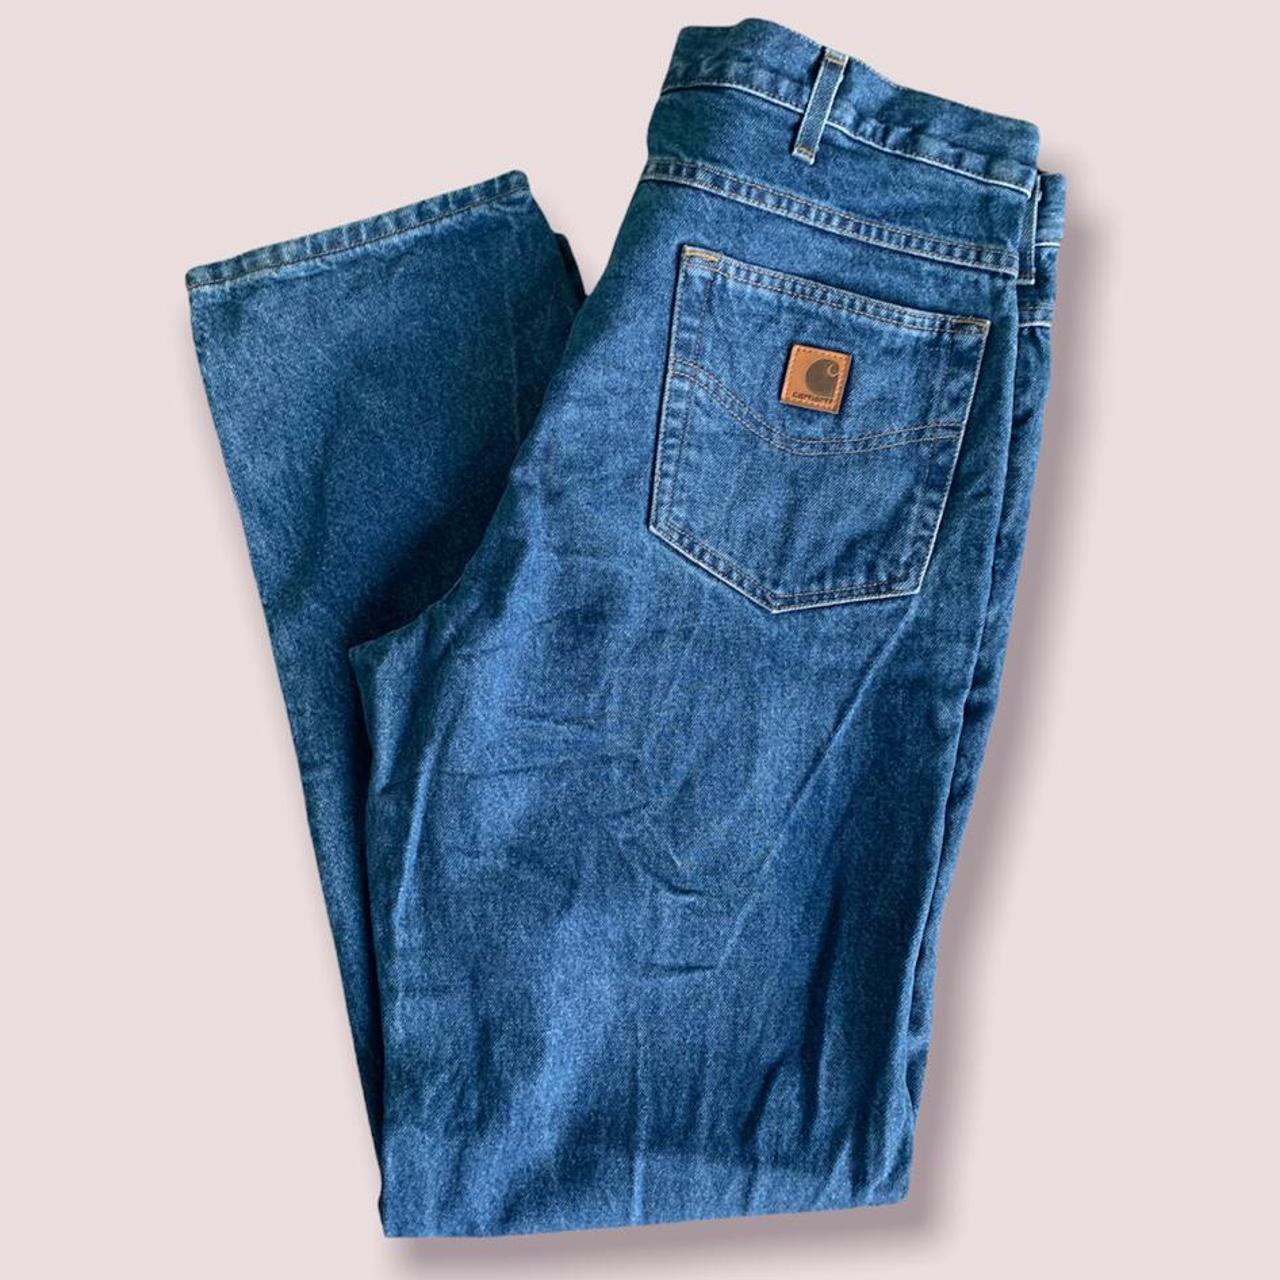 Carhartt Men's Blue and Navy Jeans